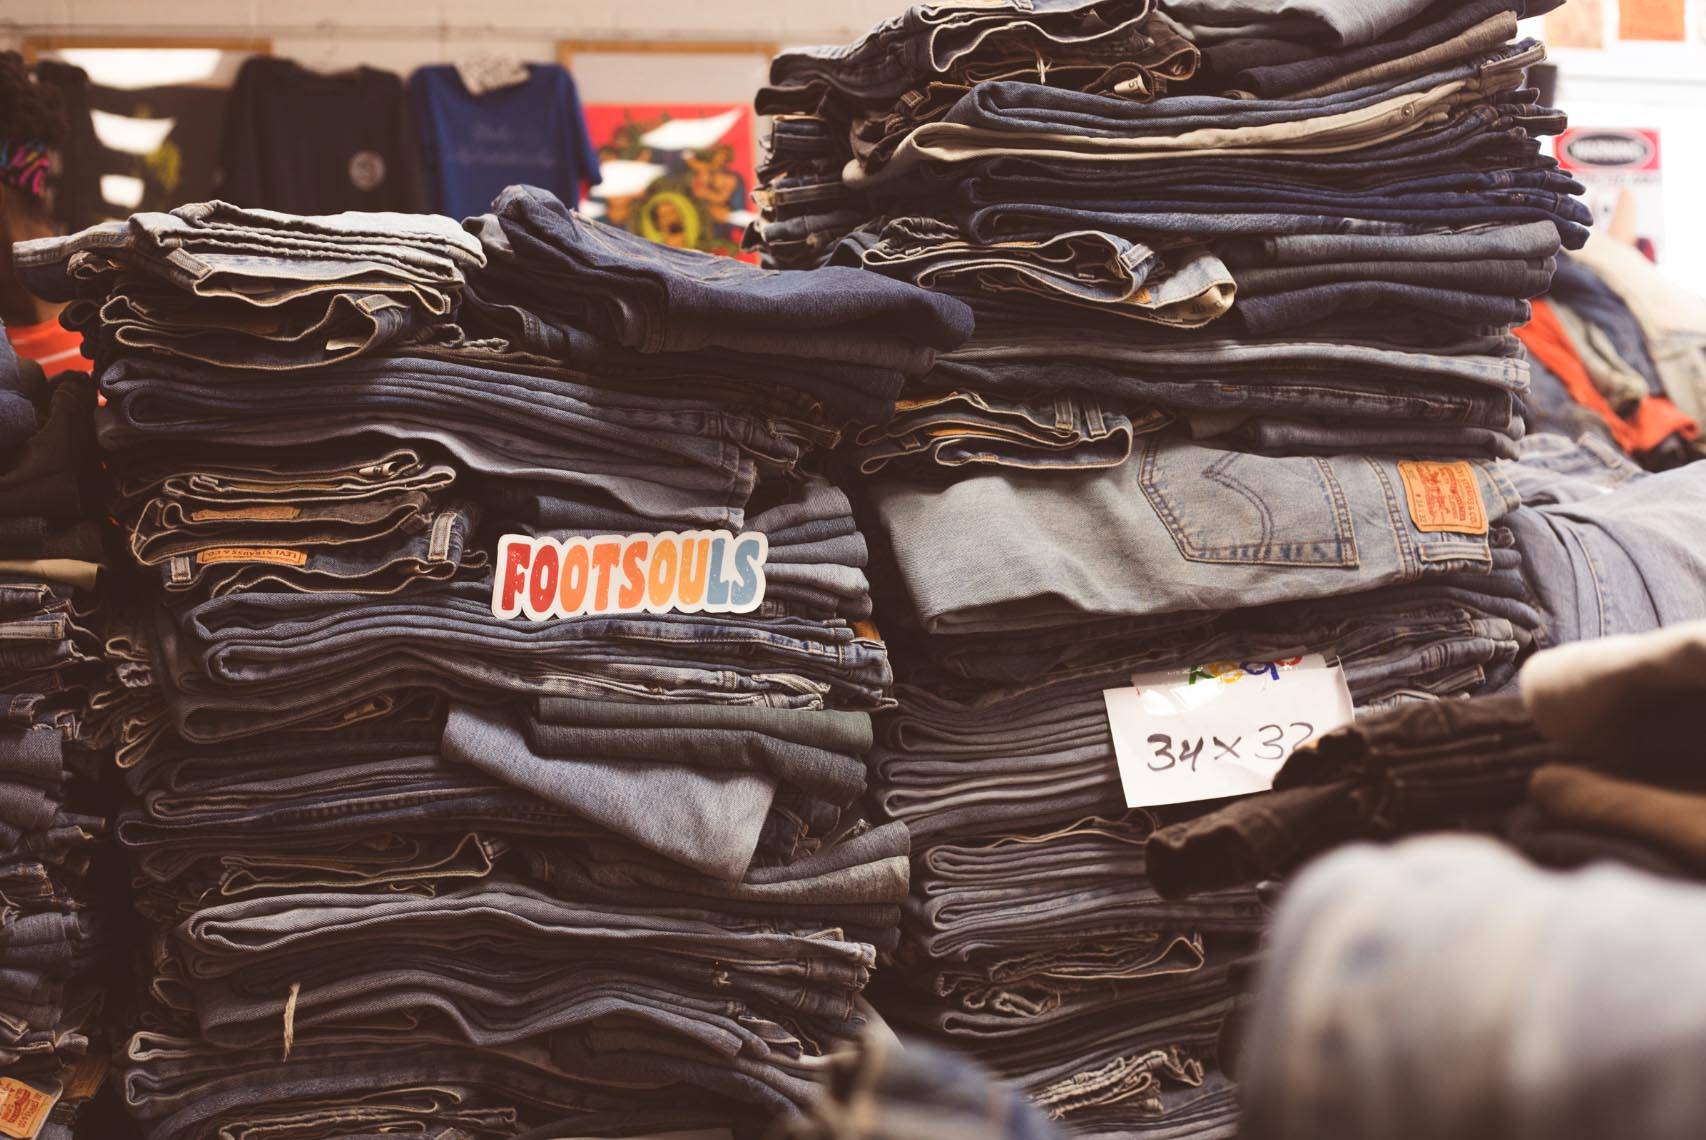 Where to find Levi's for $13 in Los Angeles – FEEL YOUR SOUL